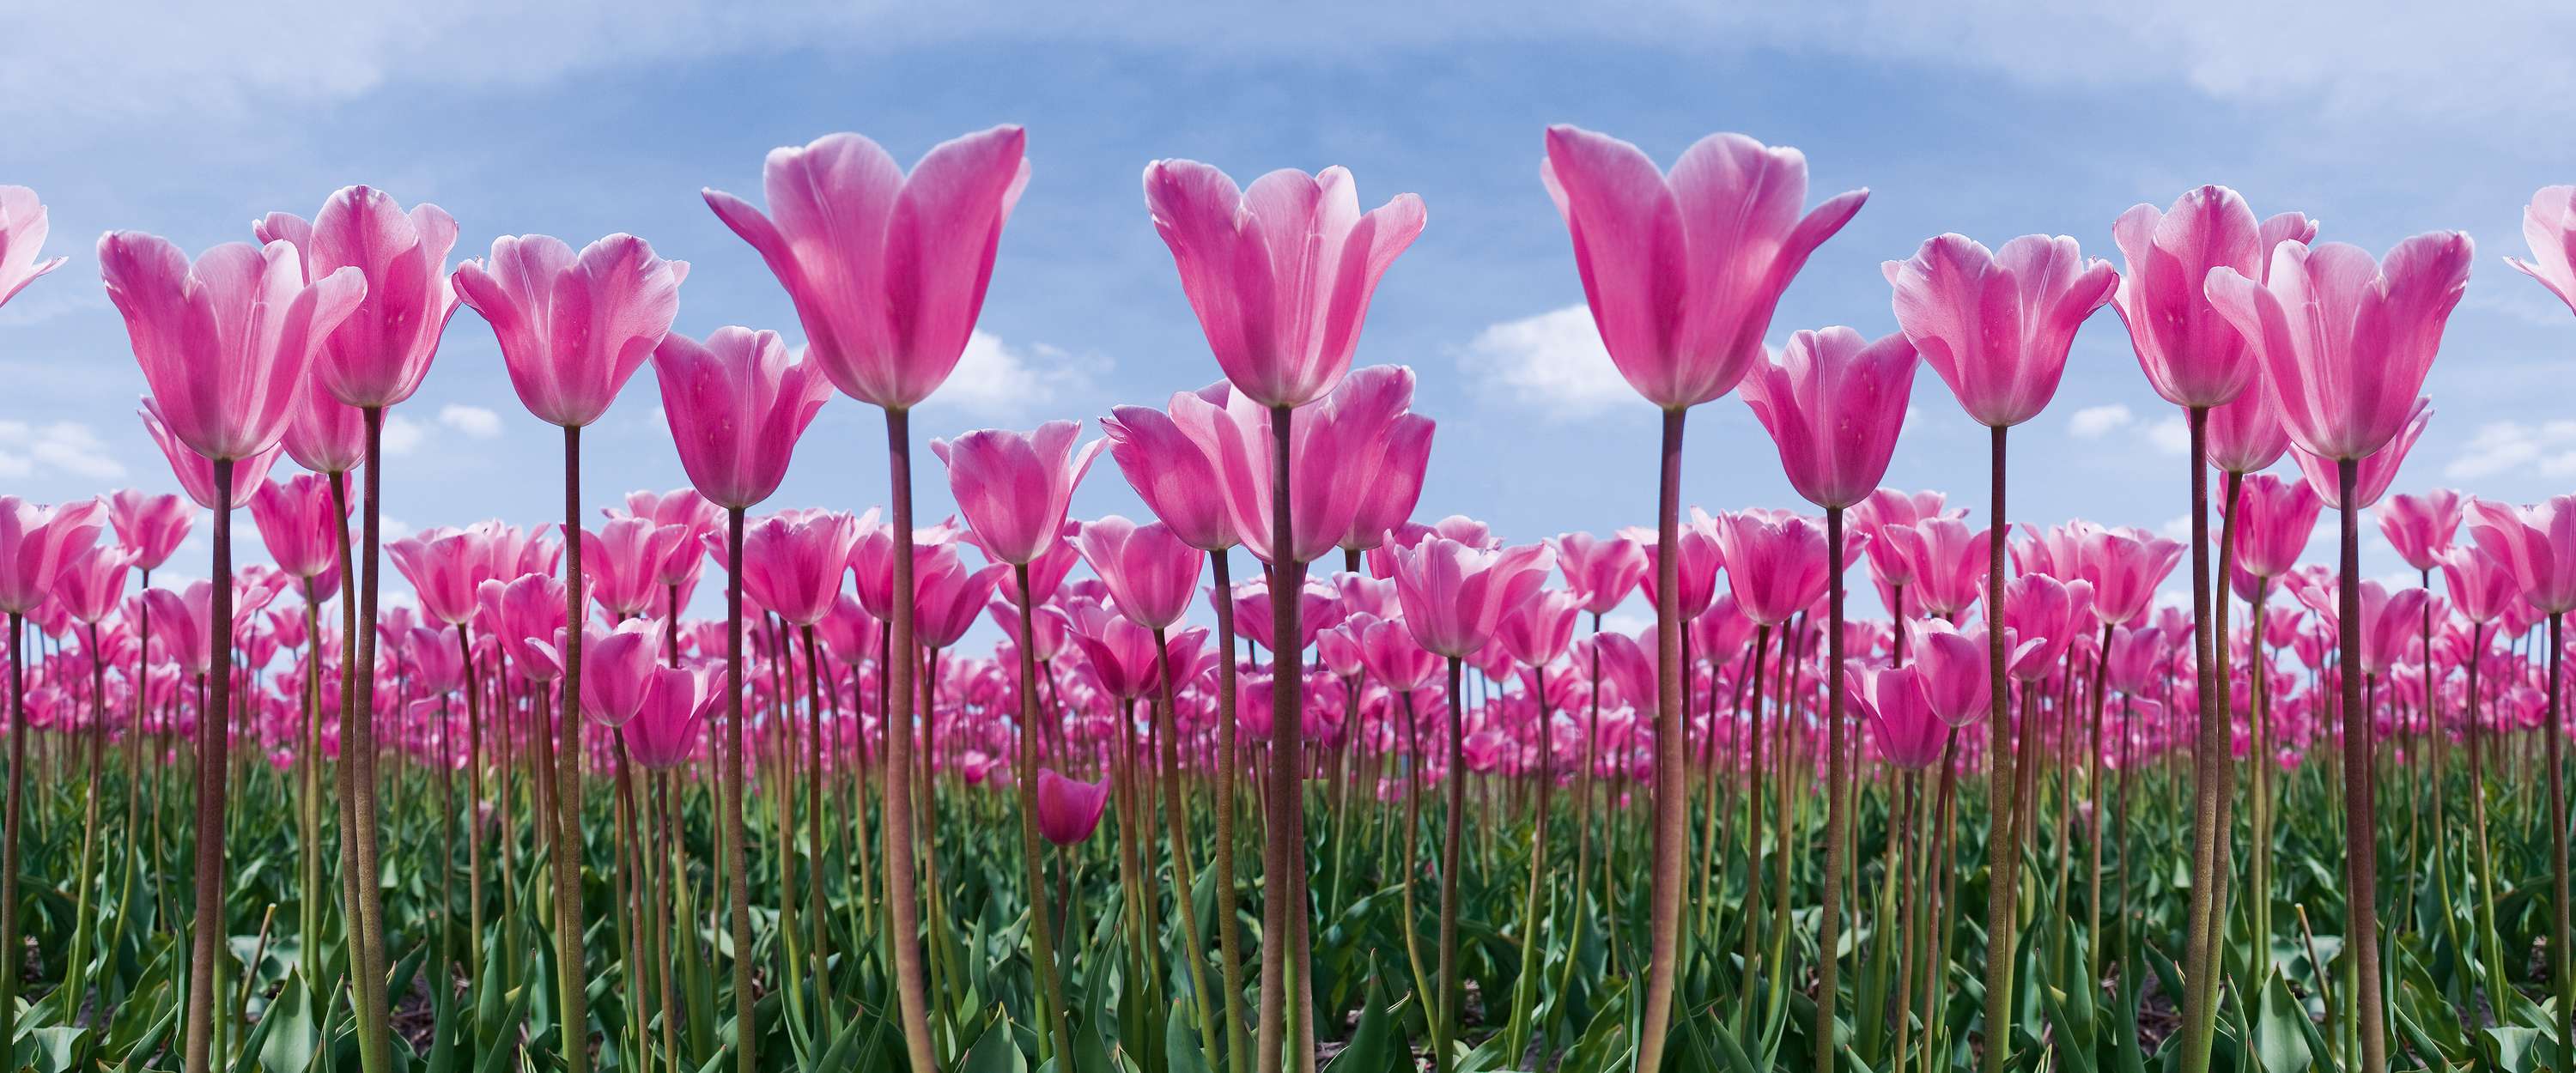             Tulip field - photo wallpaper flowers with pink tulips
        